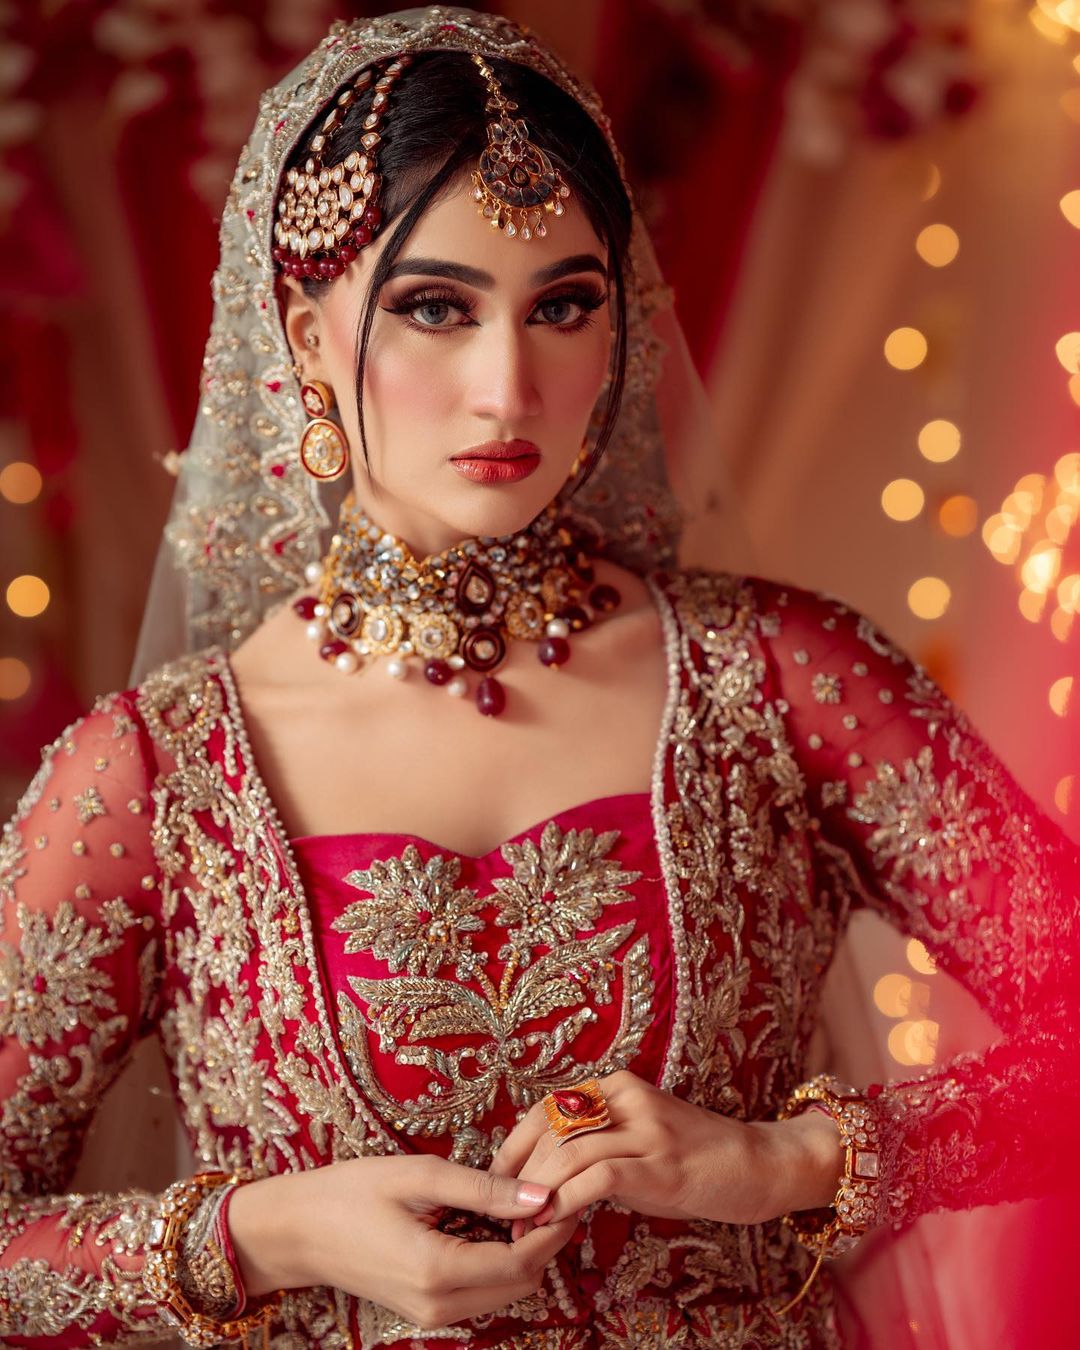 A Full-Fledged Yet 'Not Too Much' Kinda Look Of Bride Bridal Makeup Trends And Ideas For Muslim Wedding